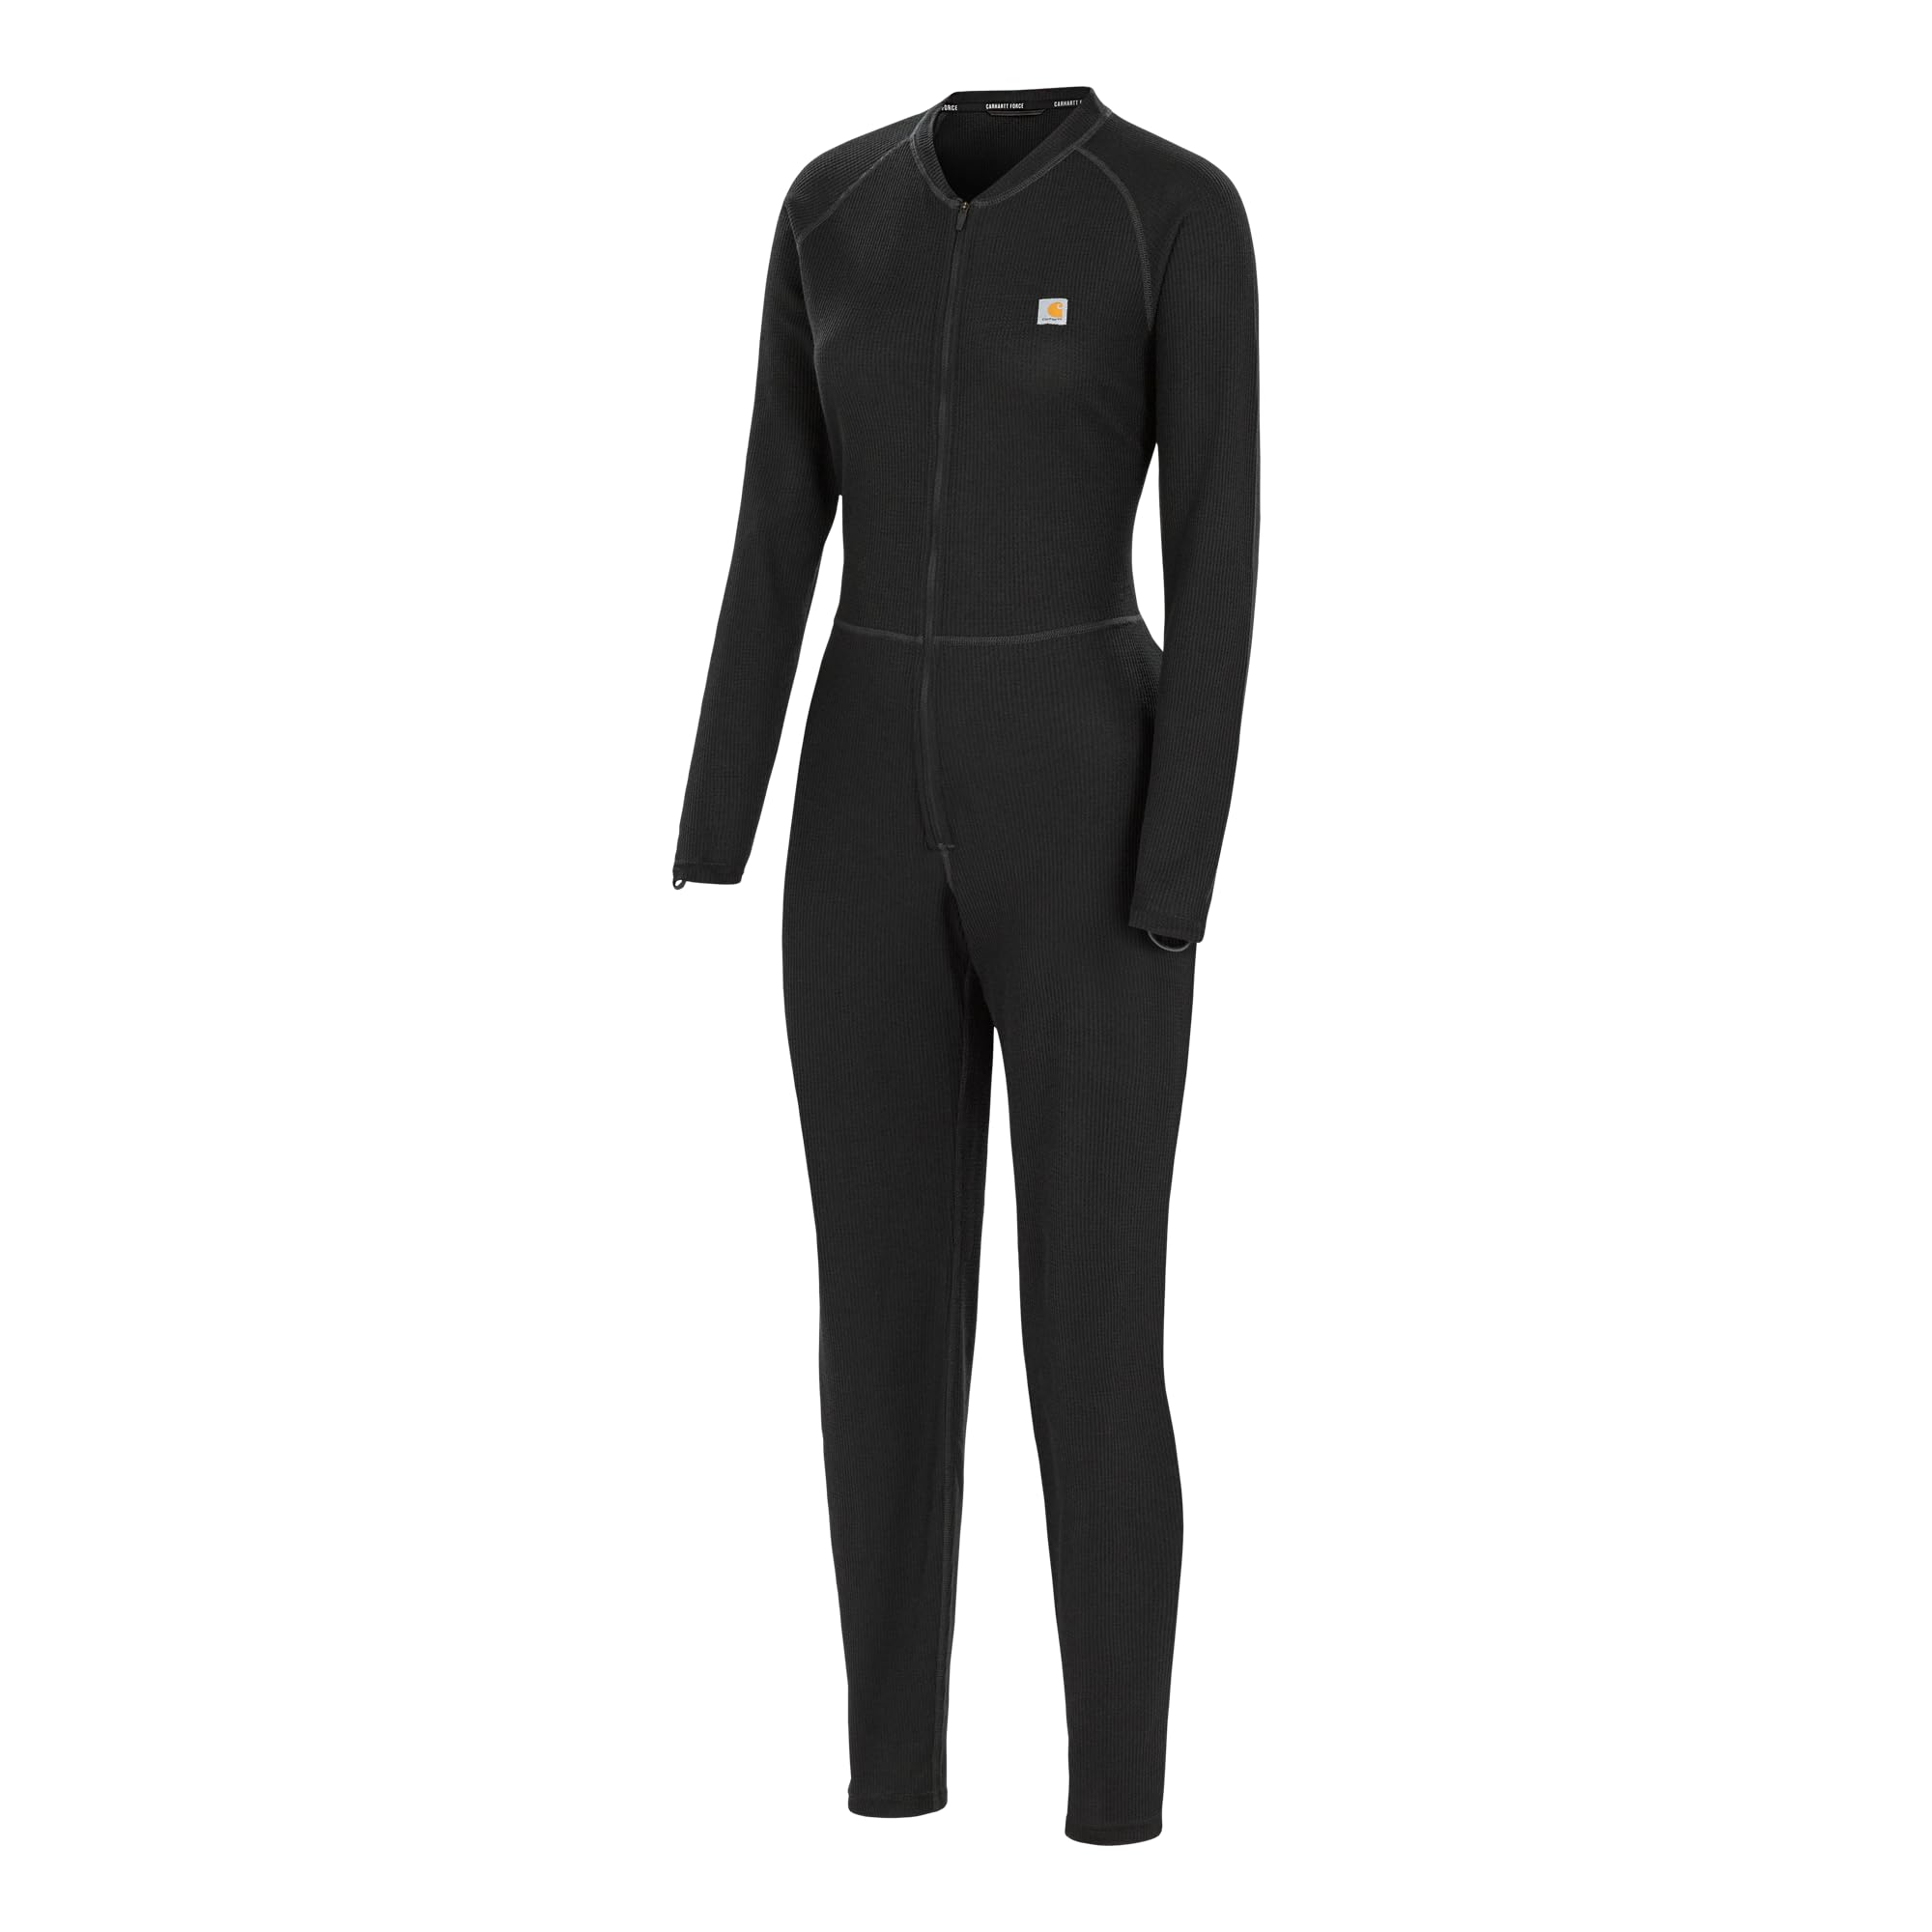 Carhartt womens Midweight Cotton Blend Waffle Zip Front Union Suit